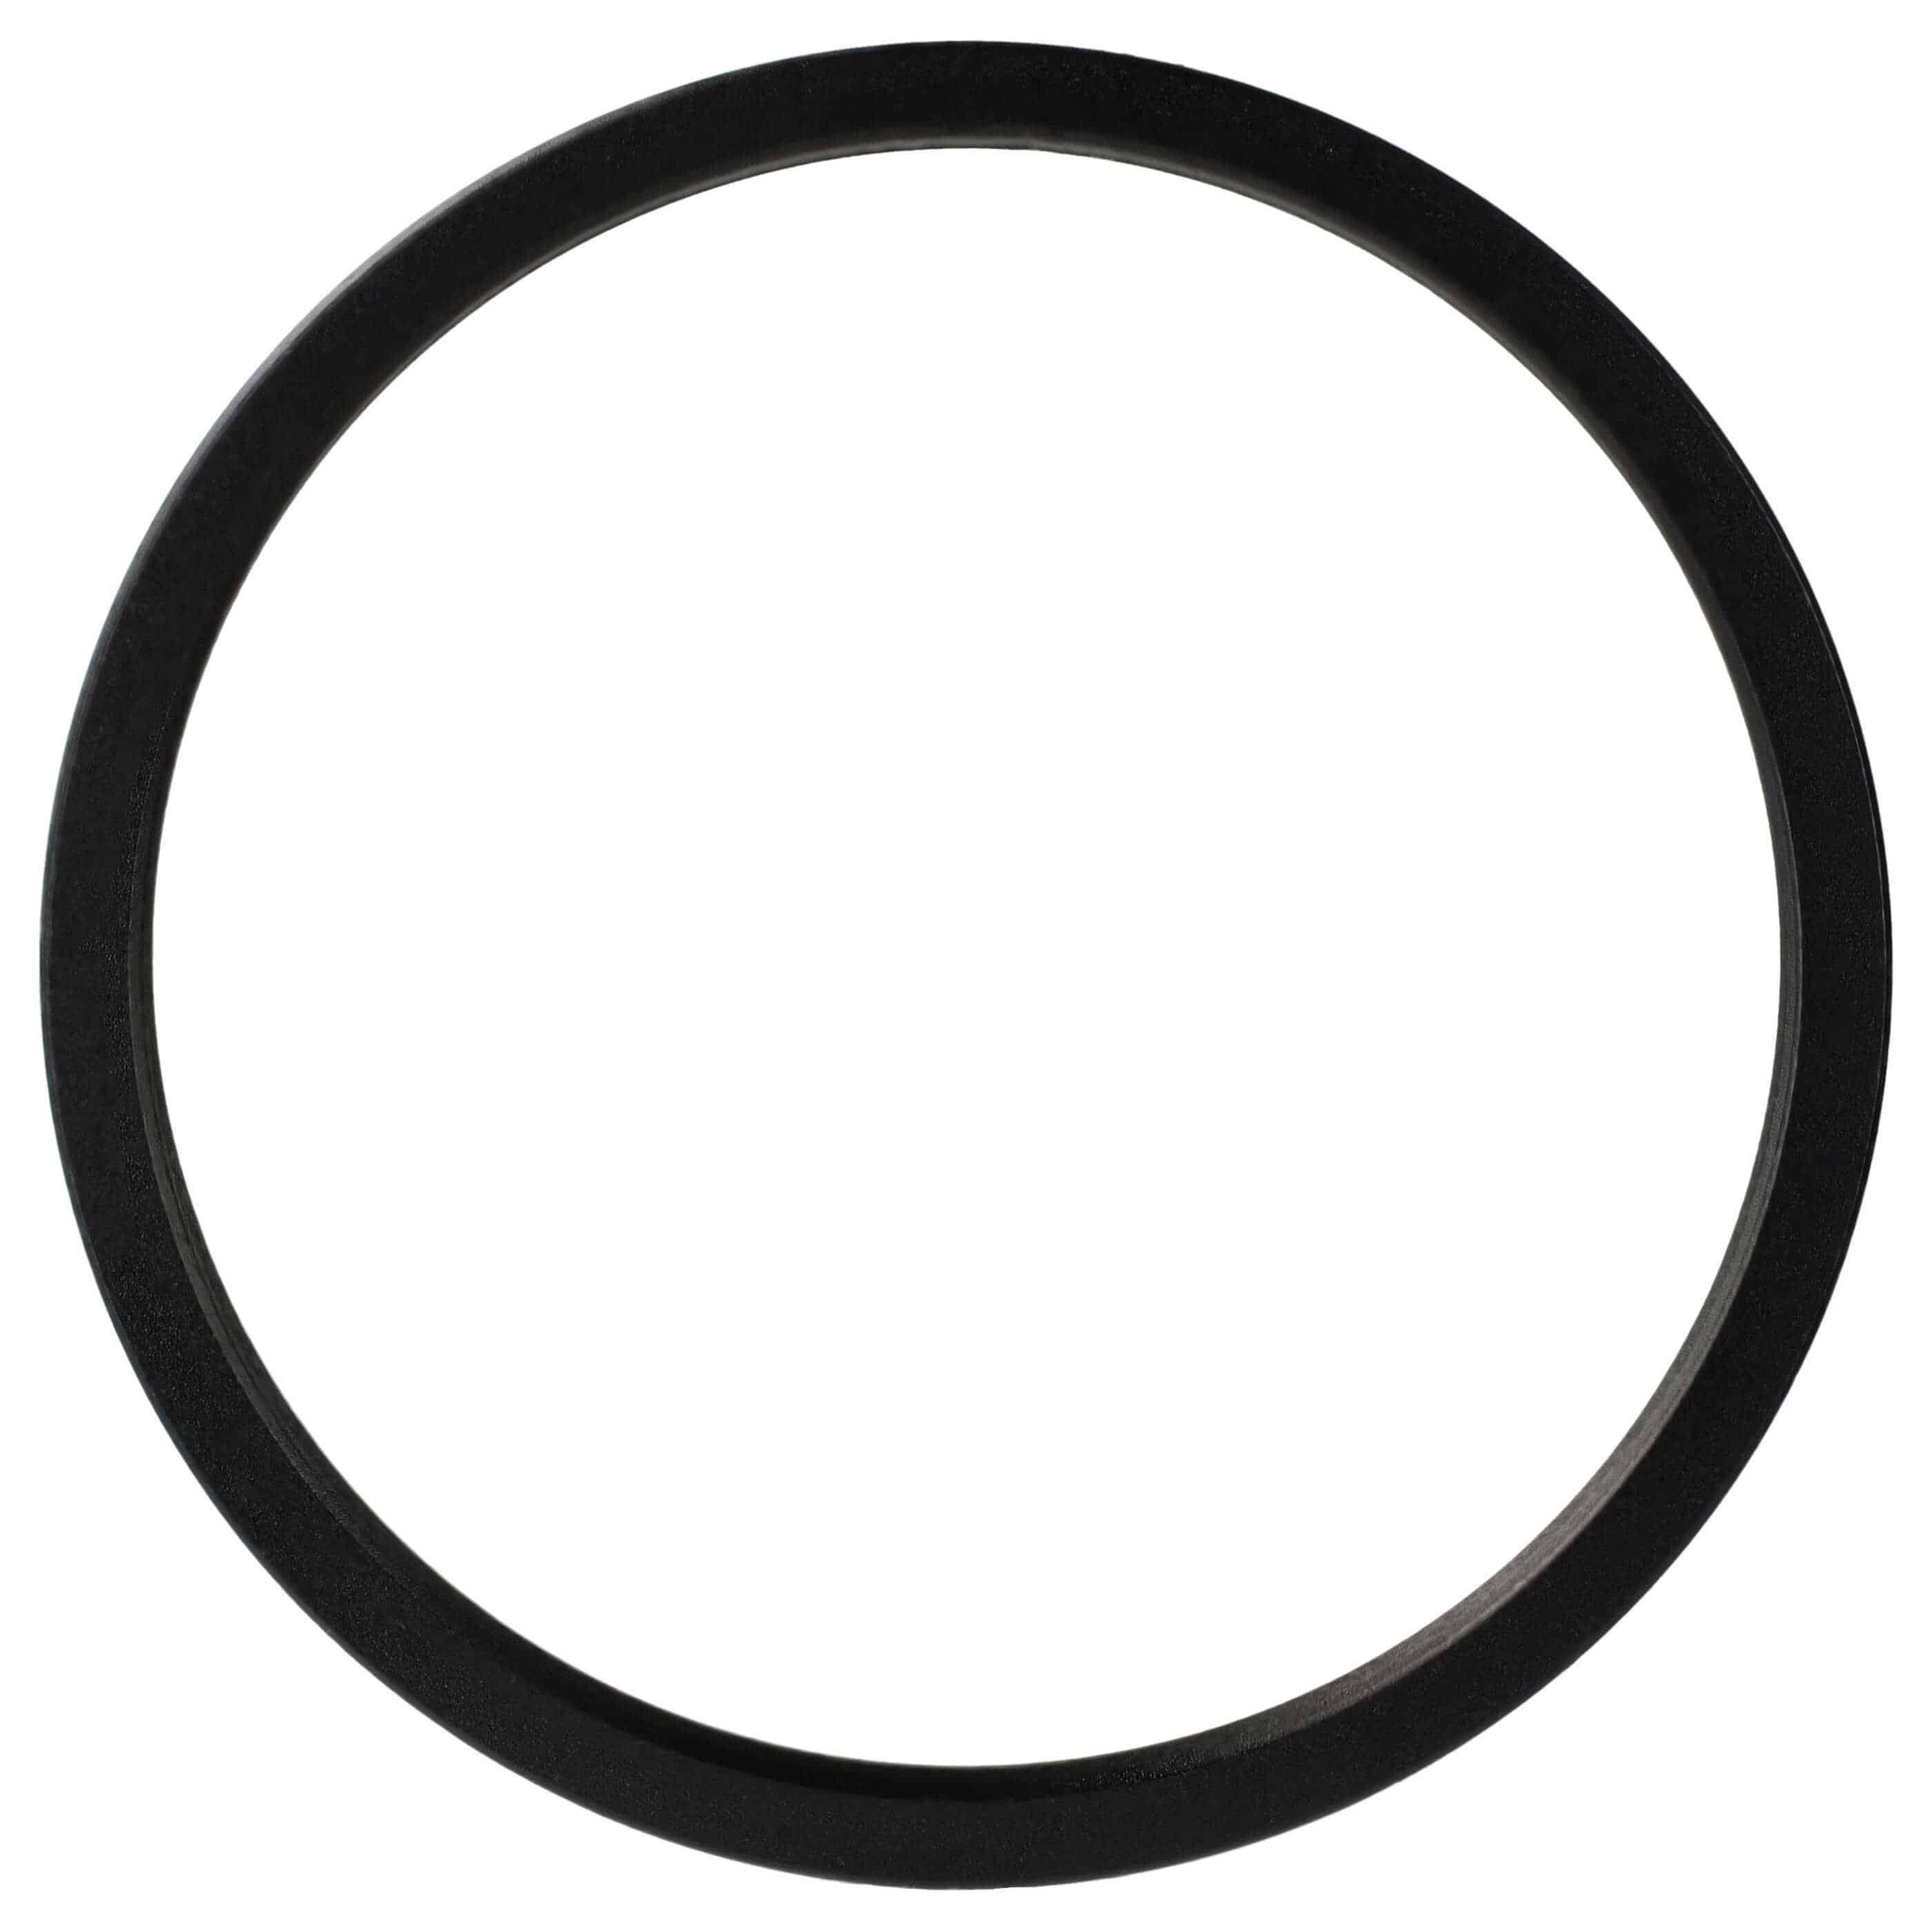 Step-Down Ring Adapter from 67 mm to 62 mm suitable for Camera Lens - Filter Adapter, metal